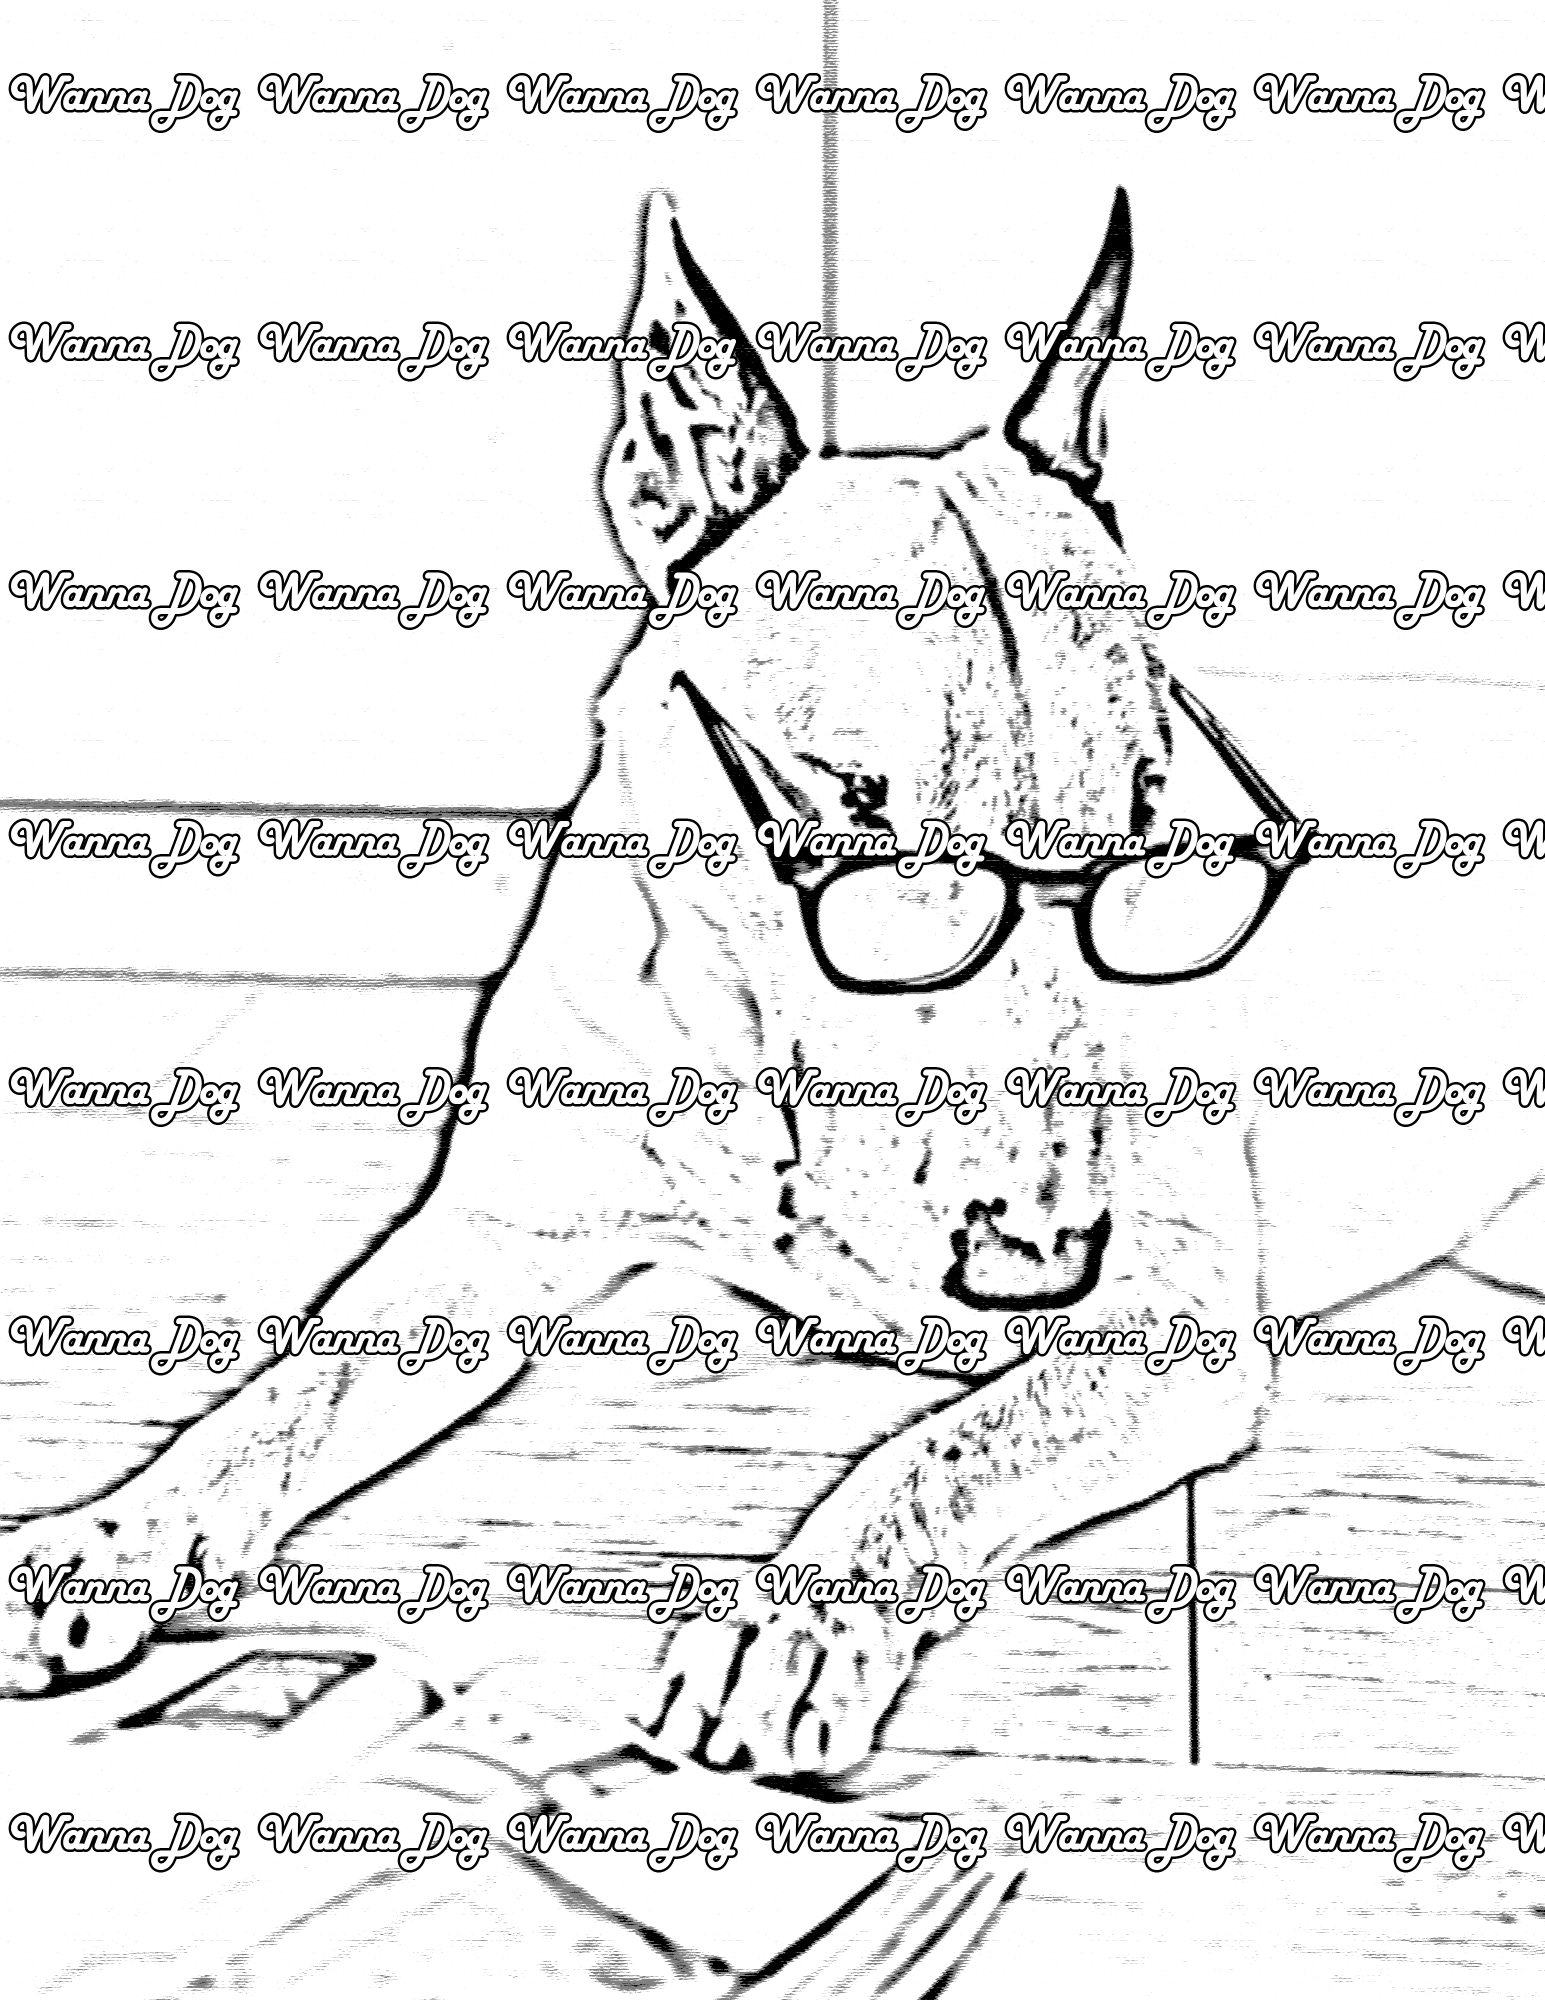 Bull Terrier Coloring Page of a Bull Terrier wearing glasses and reading